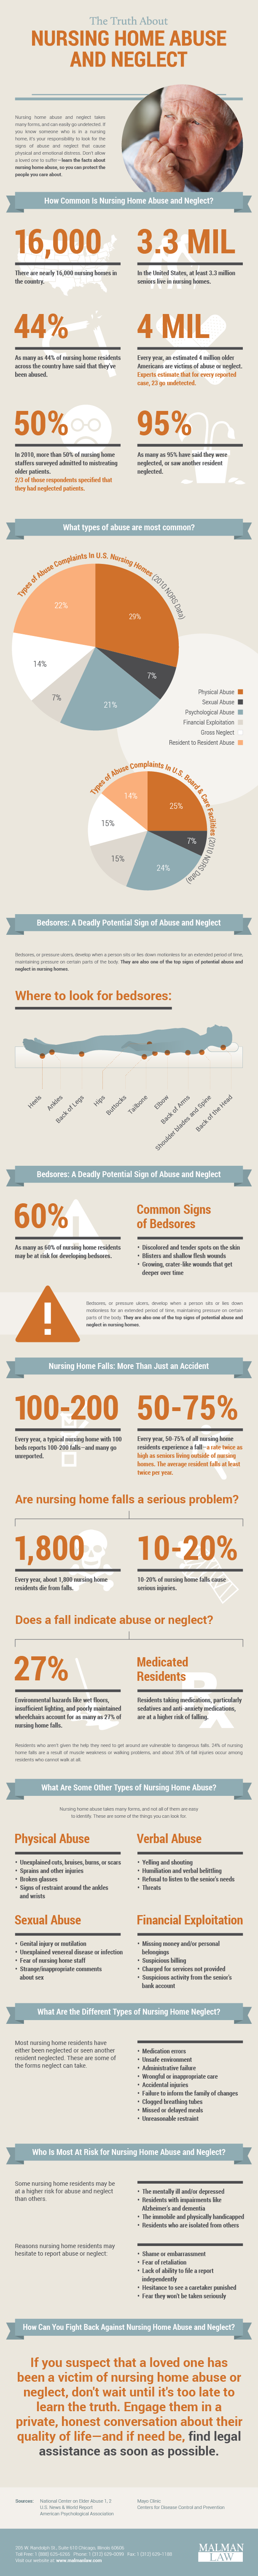 The Truth About Nursing Home Abuse and Neglect